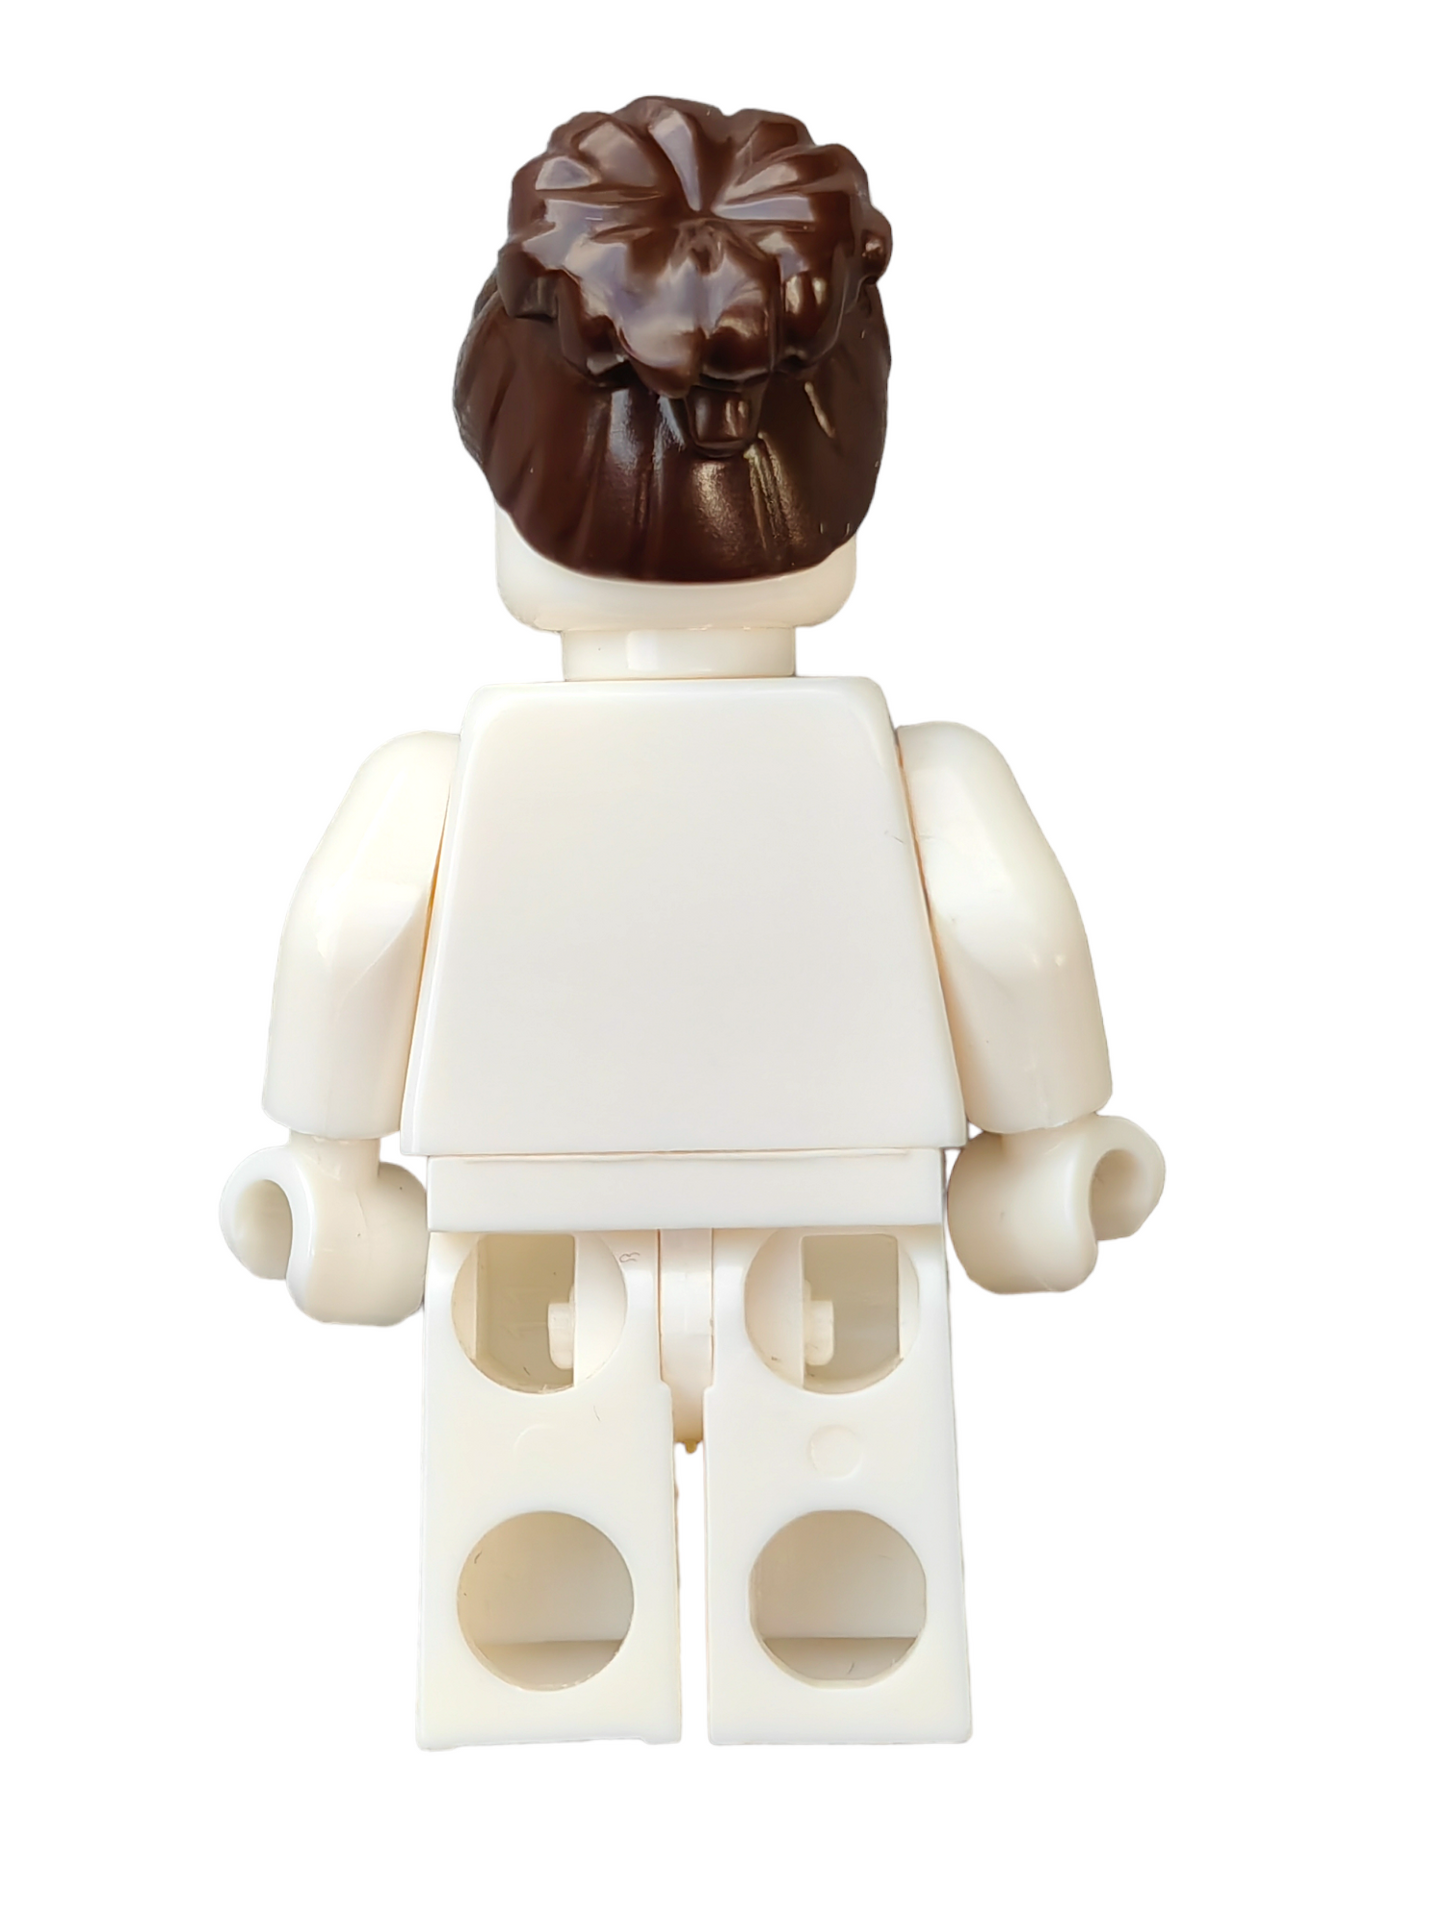 LEGO Wig, Dark Brown Hair with Large Bun High to the Back - UB1286